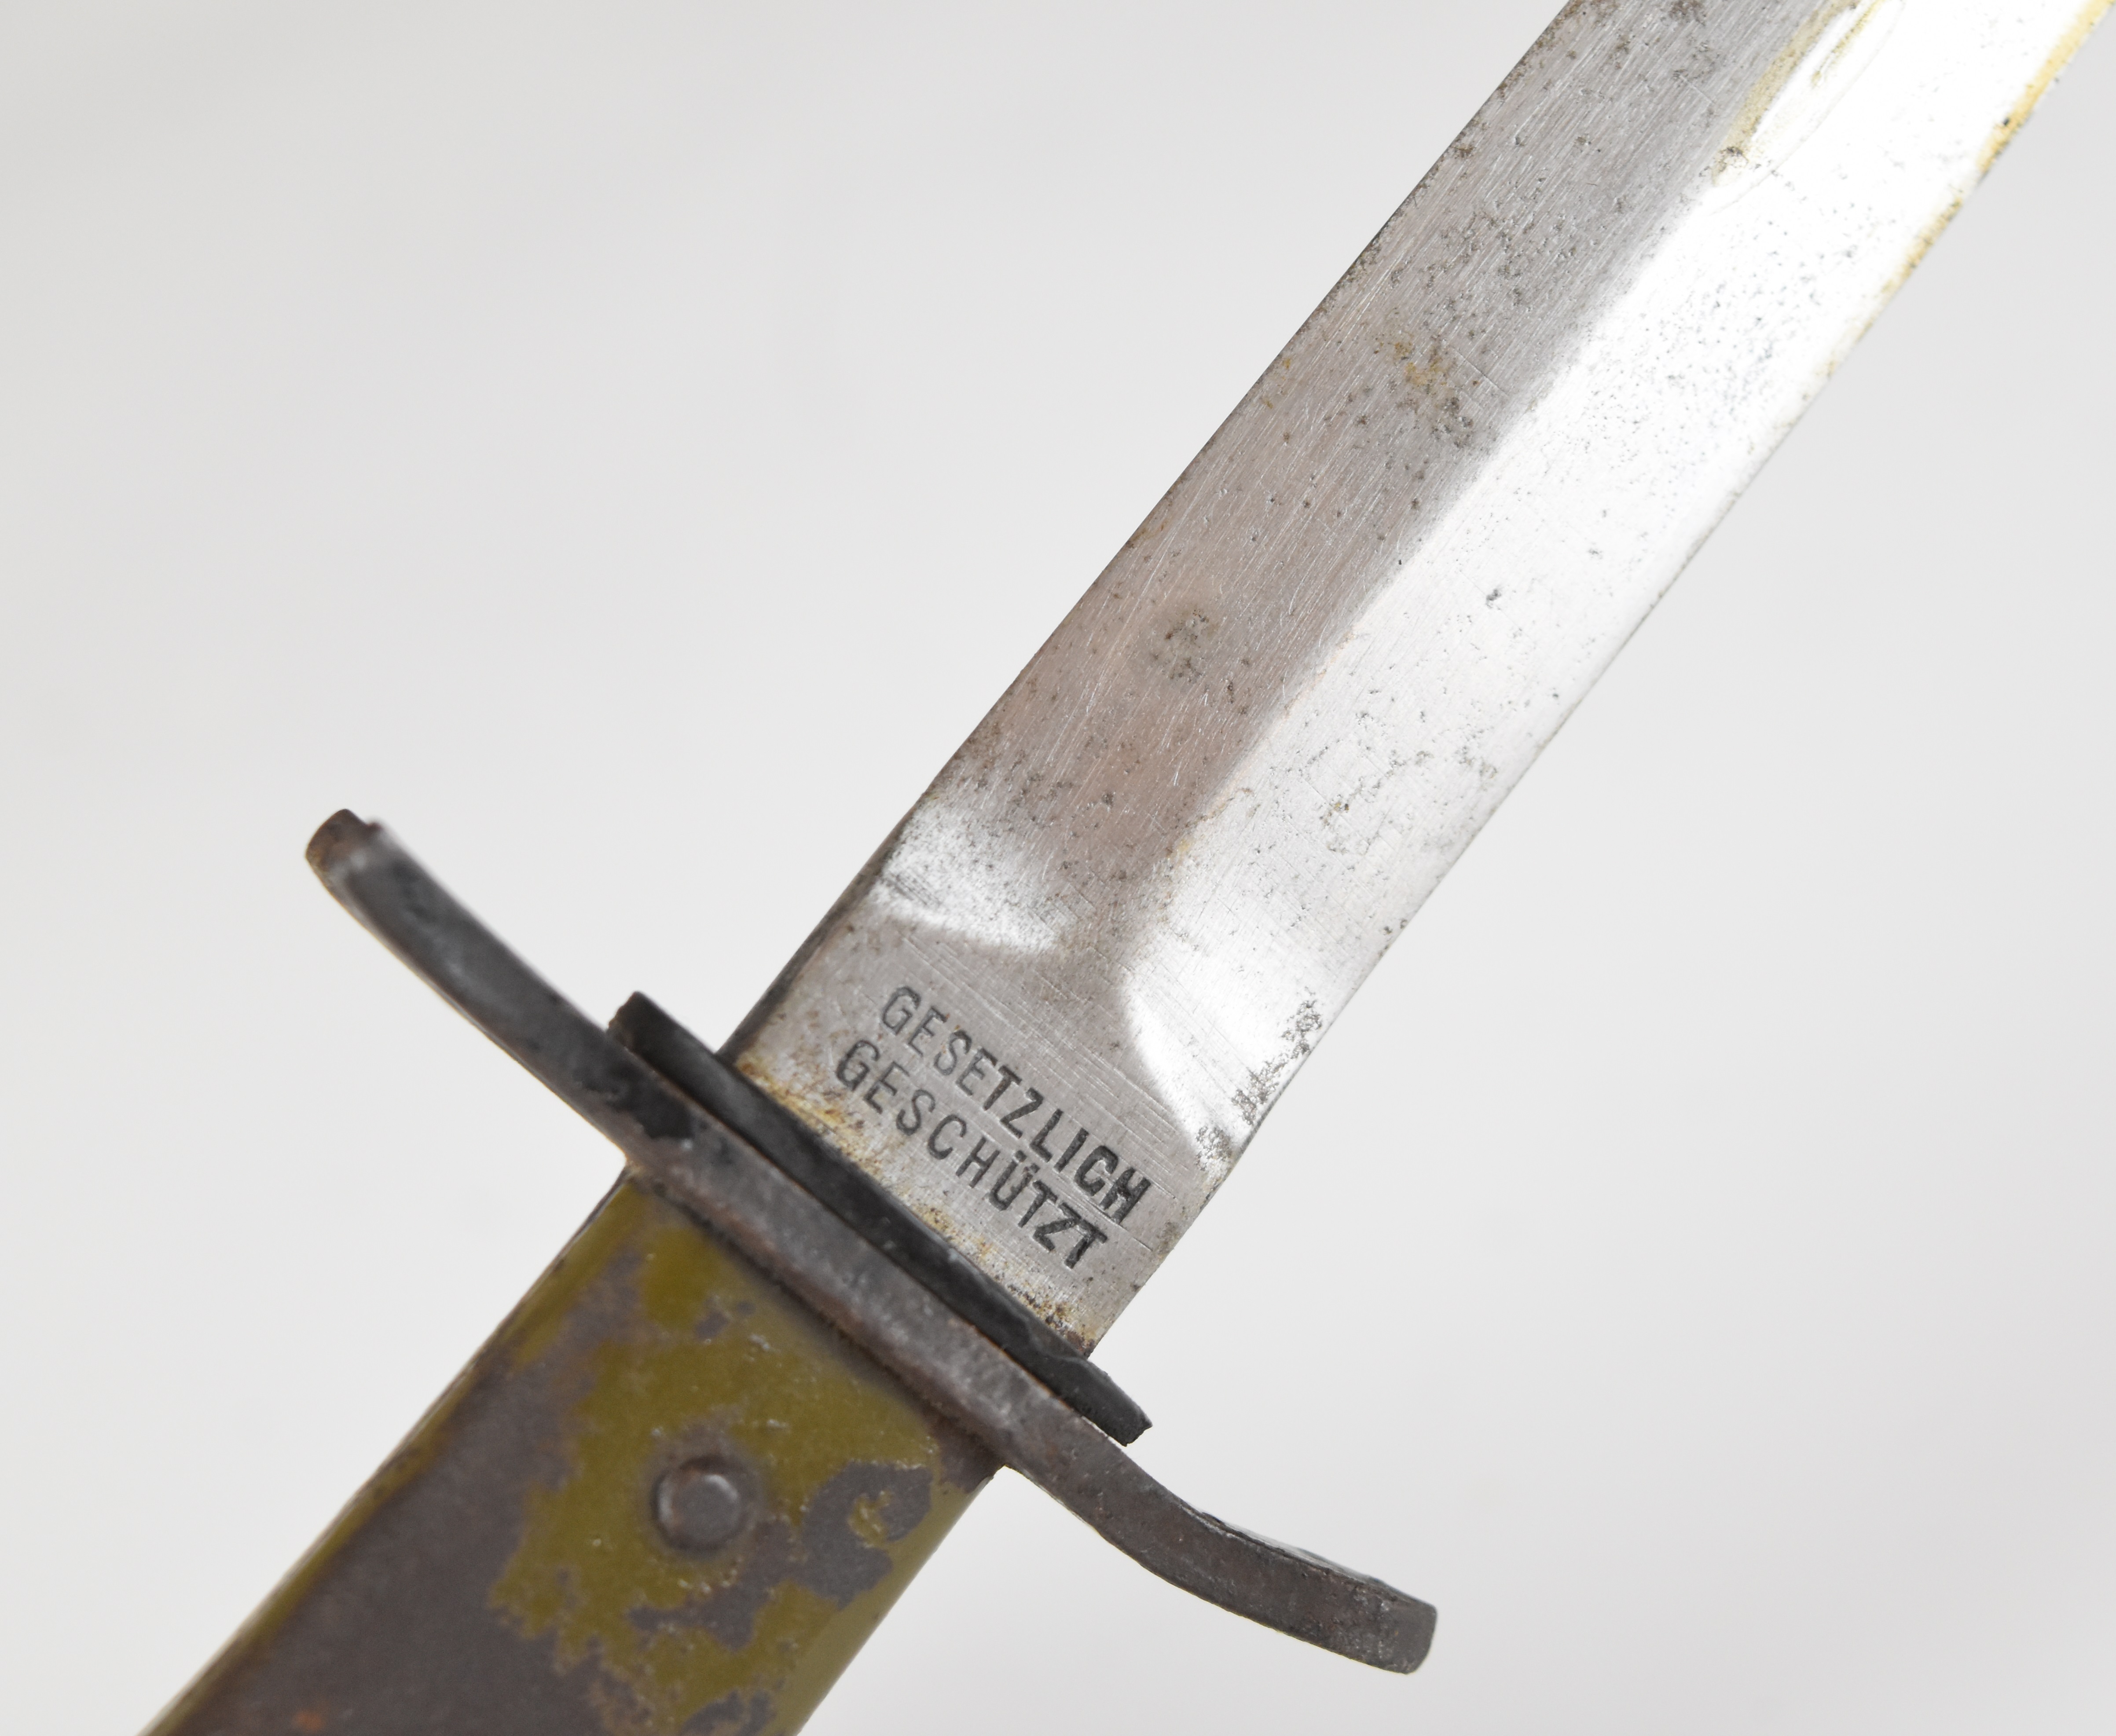 German WW1 crank handled trench knife bayonet with Demag Duisberg and Gesetzlich Geschutzt to - Image 5 of 8